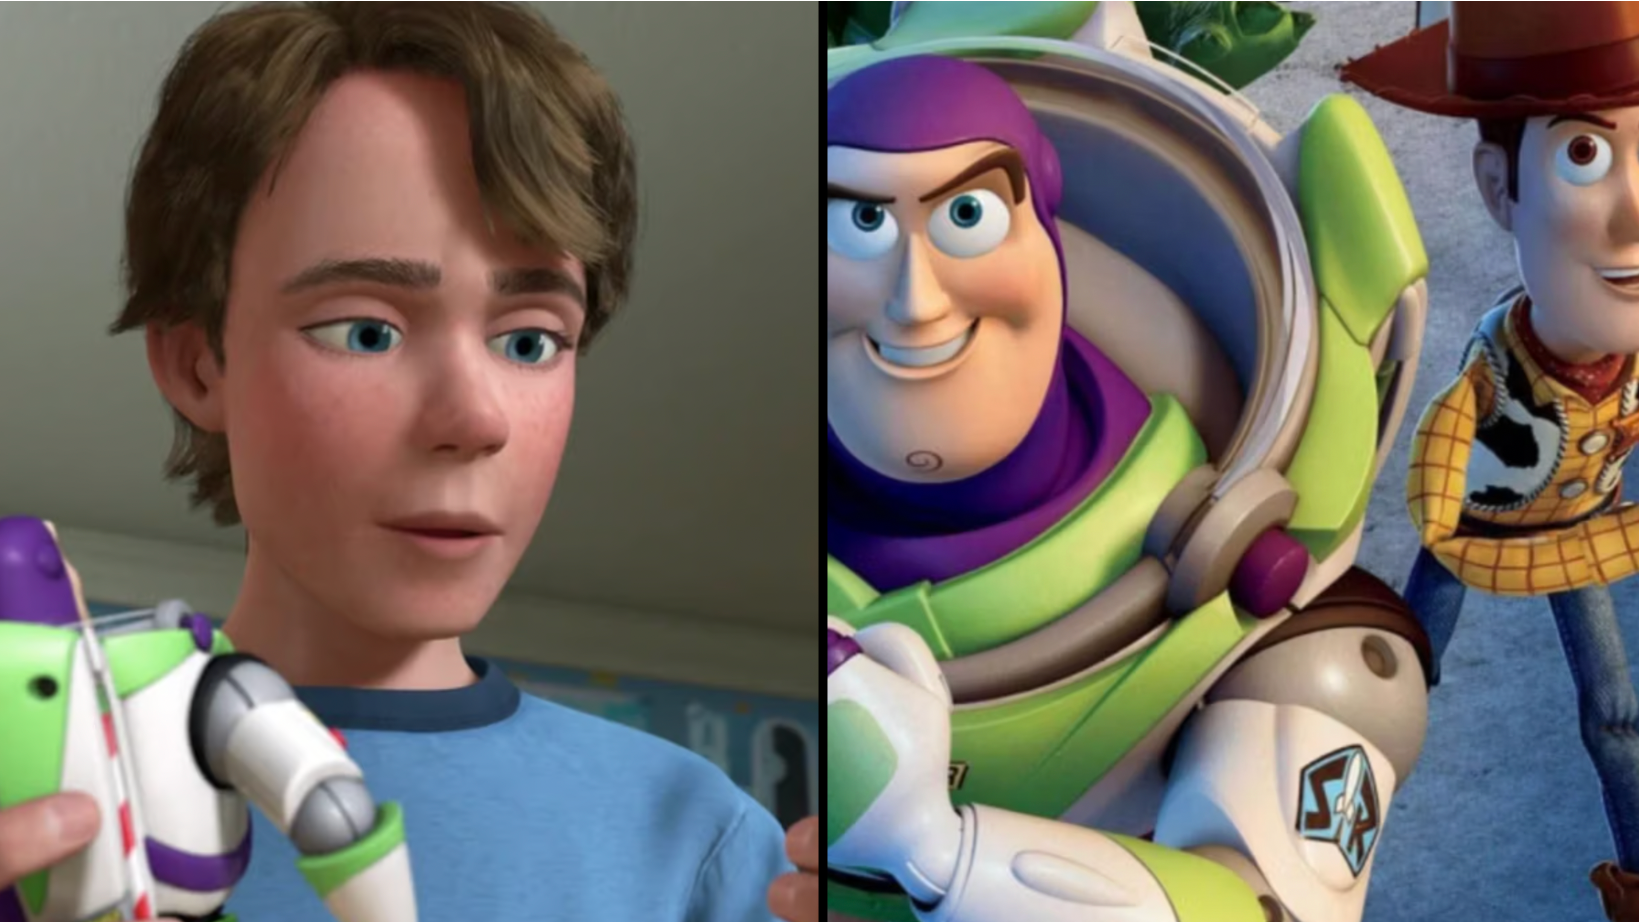 Toy Story 5 rumors say Andy will return in fifth film